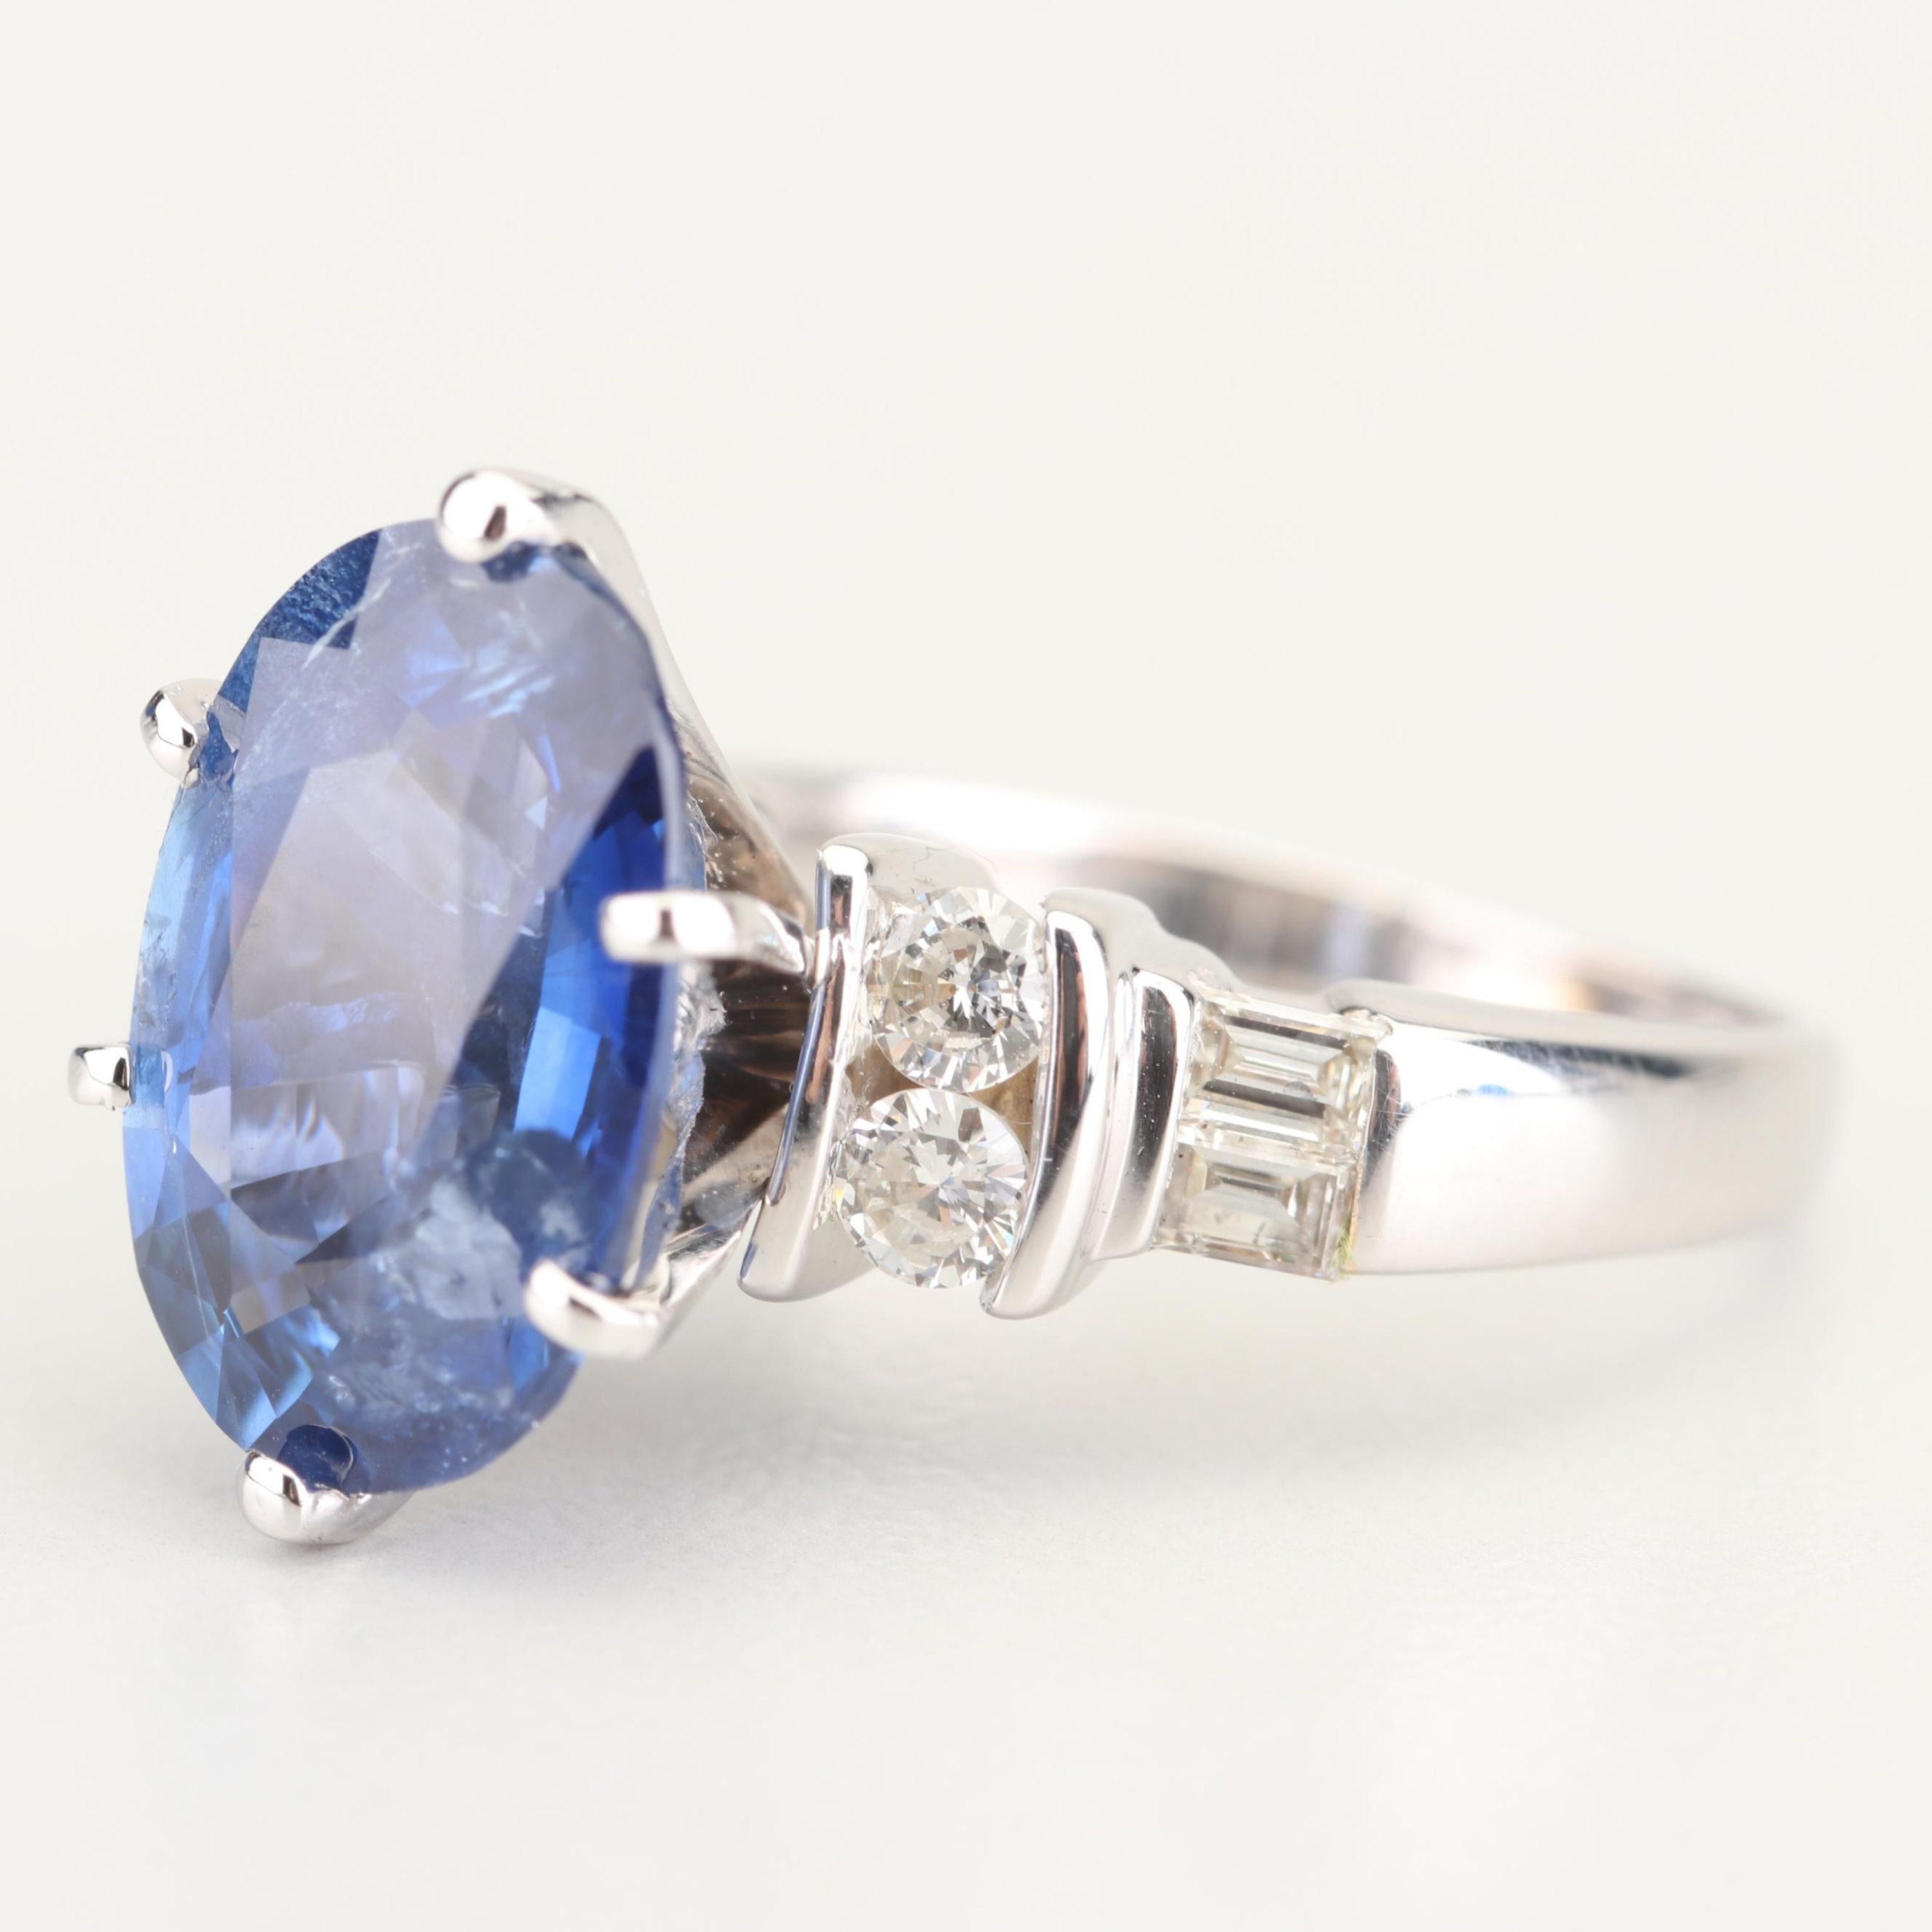 For Sale:  Art Deco 6 CT Certified Natural Sapphire and Diamond Engagement Ring in 18K Gold 3